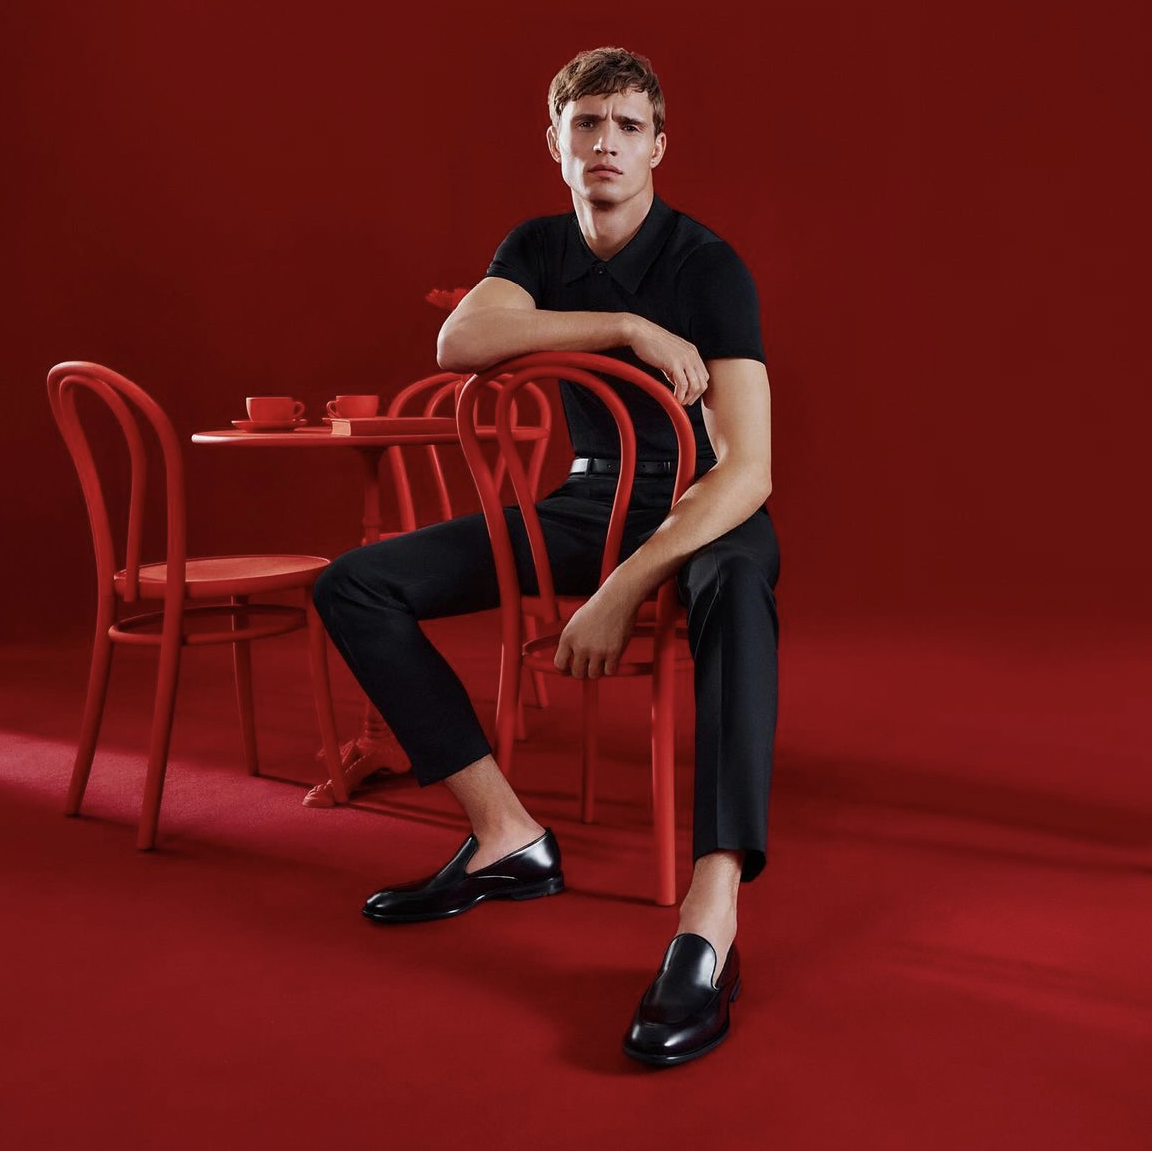 A striking image showcasing a Caucasian male model for the Lloyd Shoes SS24 campaign against a stylish all-red backdrop, including a red table, red chair, and red room décor.